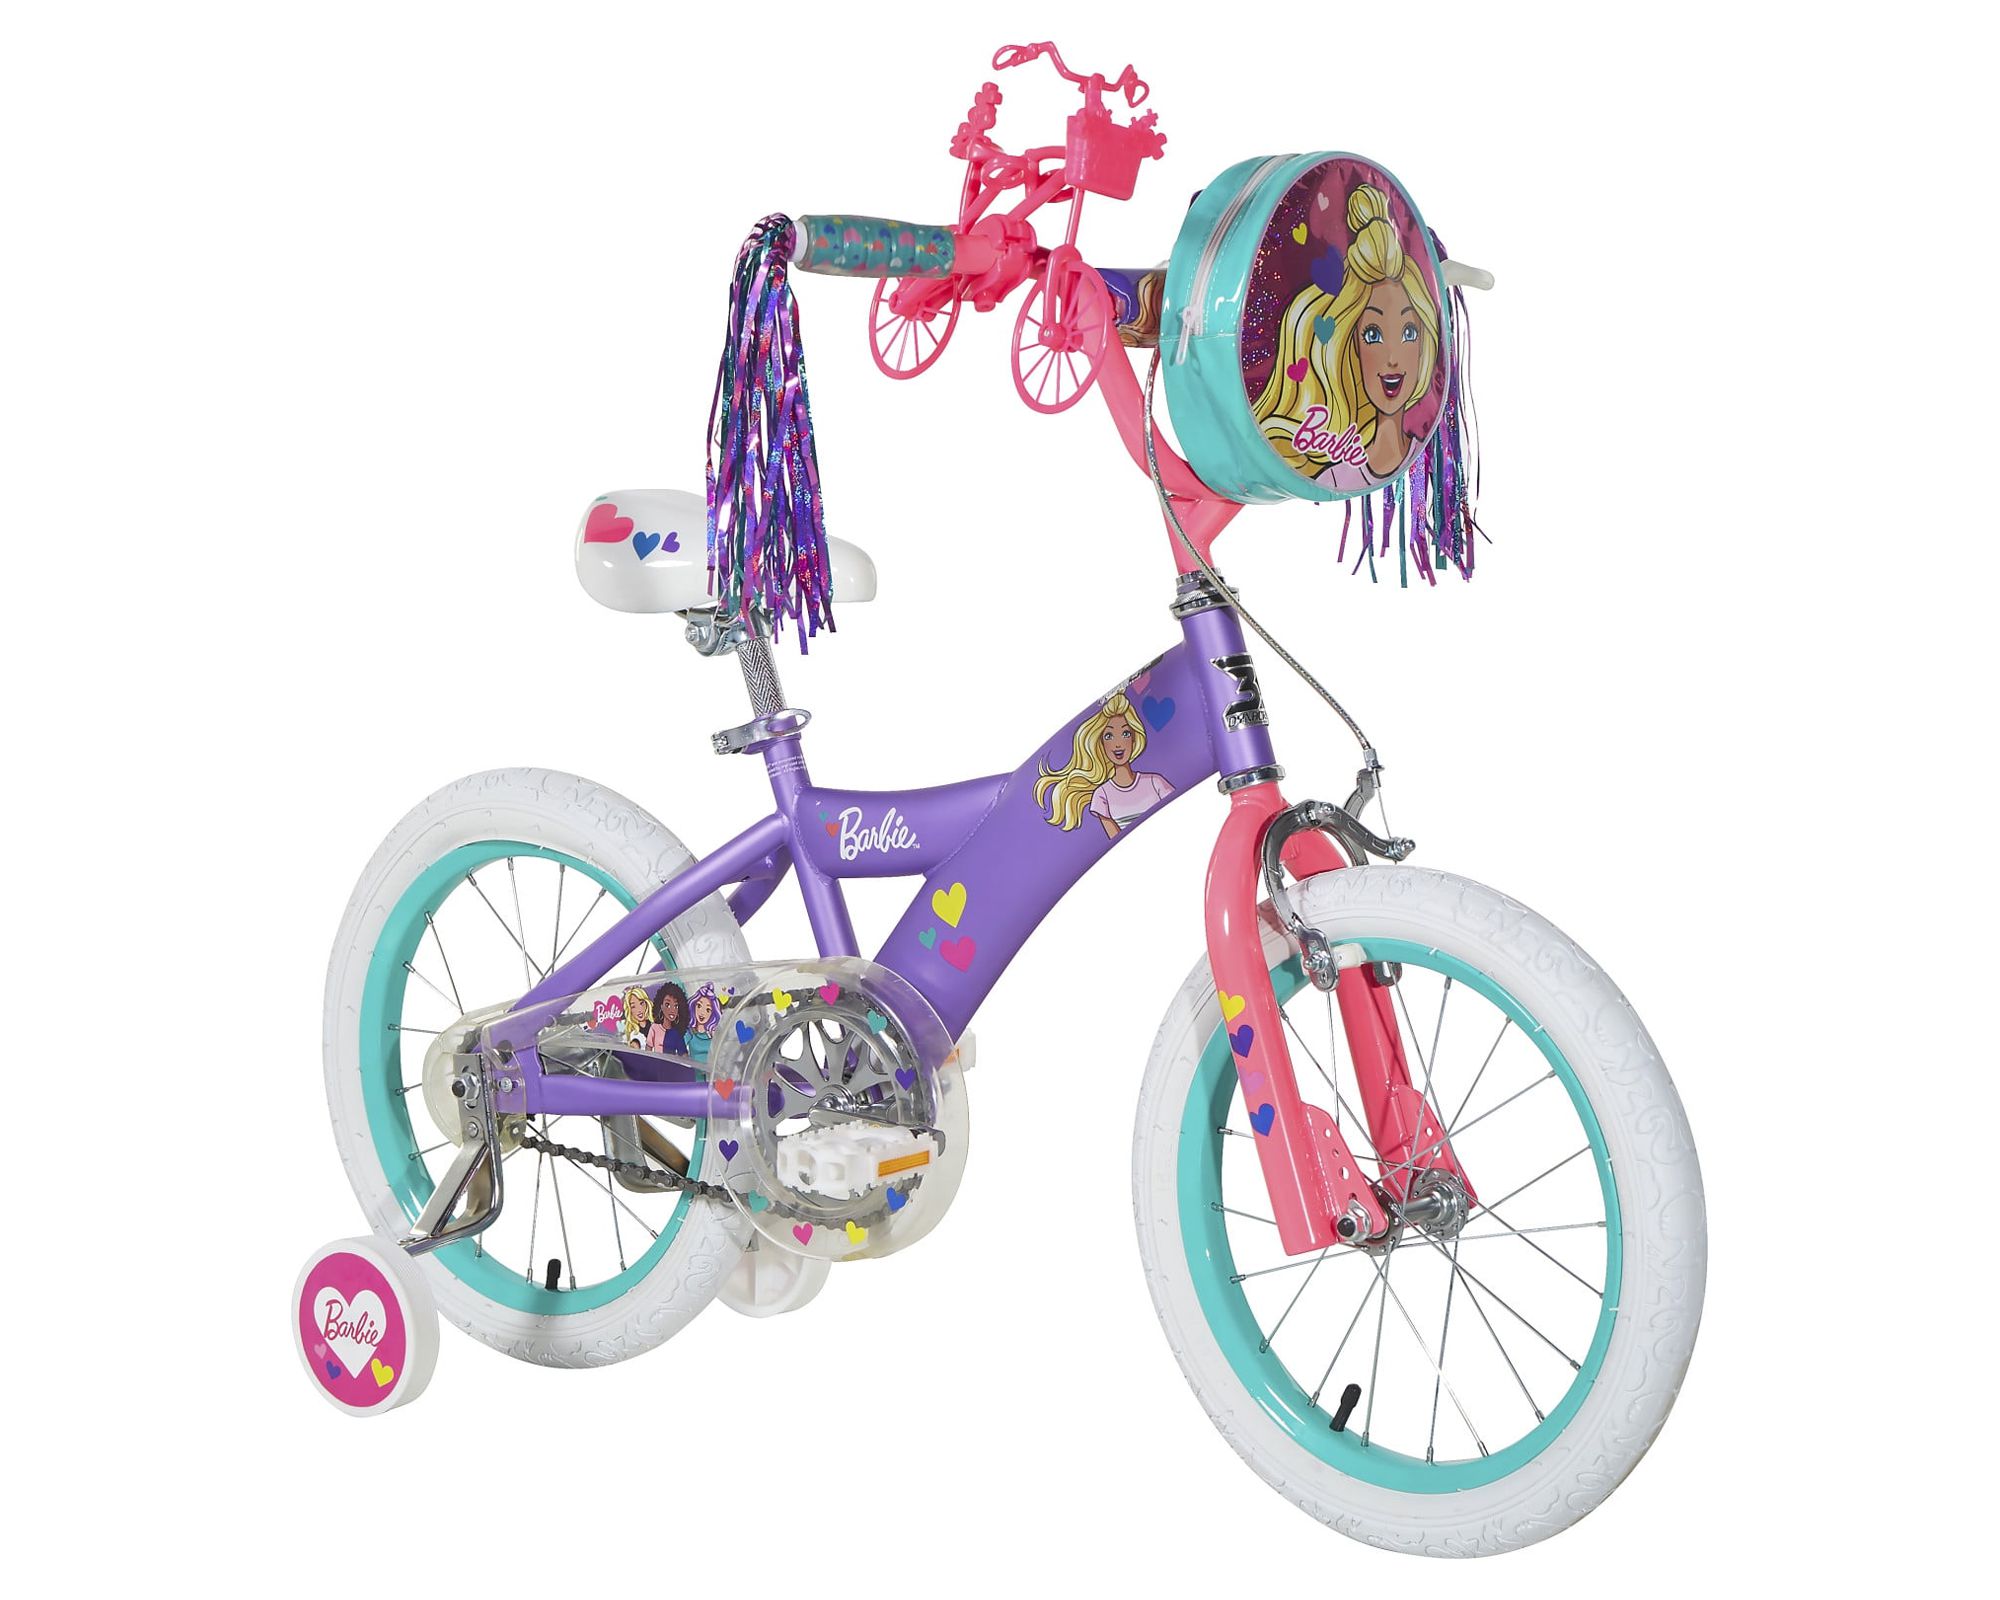 Dynacraft Barbie 16-Inch BMX Bike For Age 5-7 Years - image 1 of 11